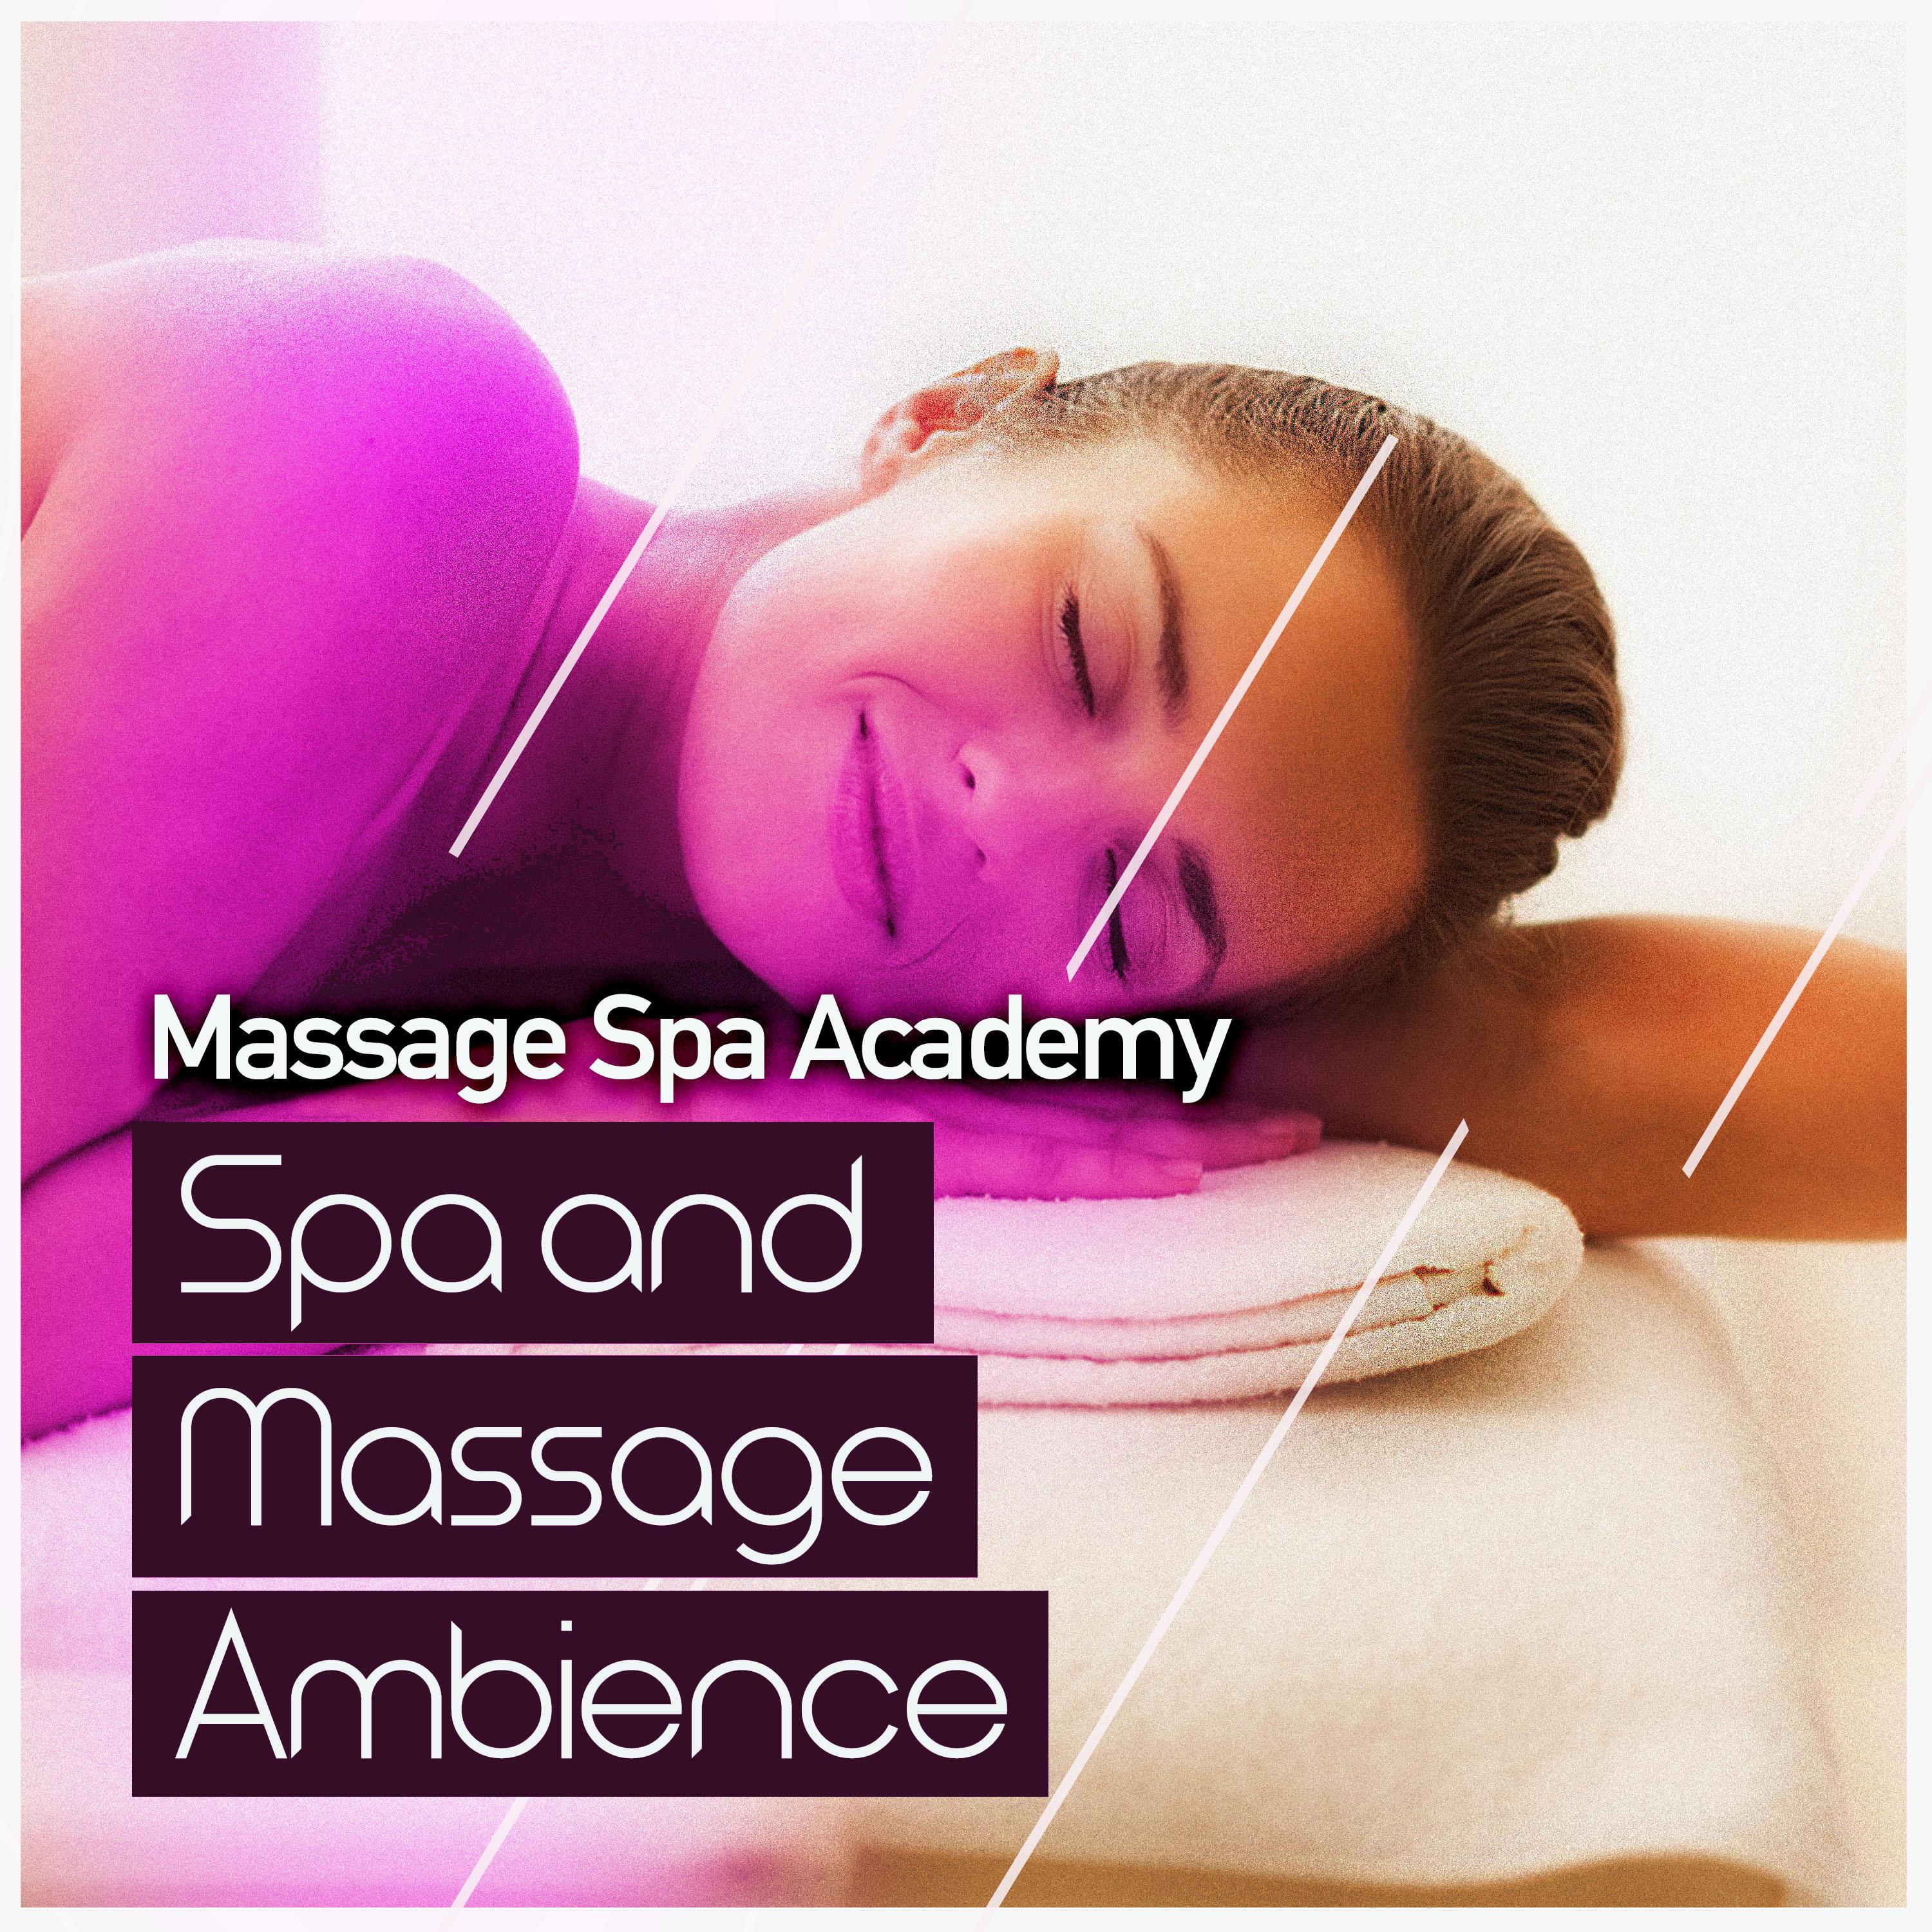 Spa and Massage Ambience